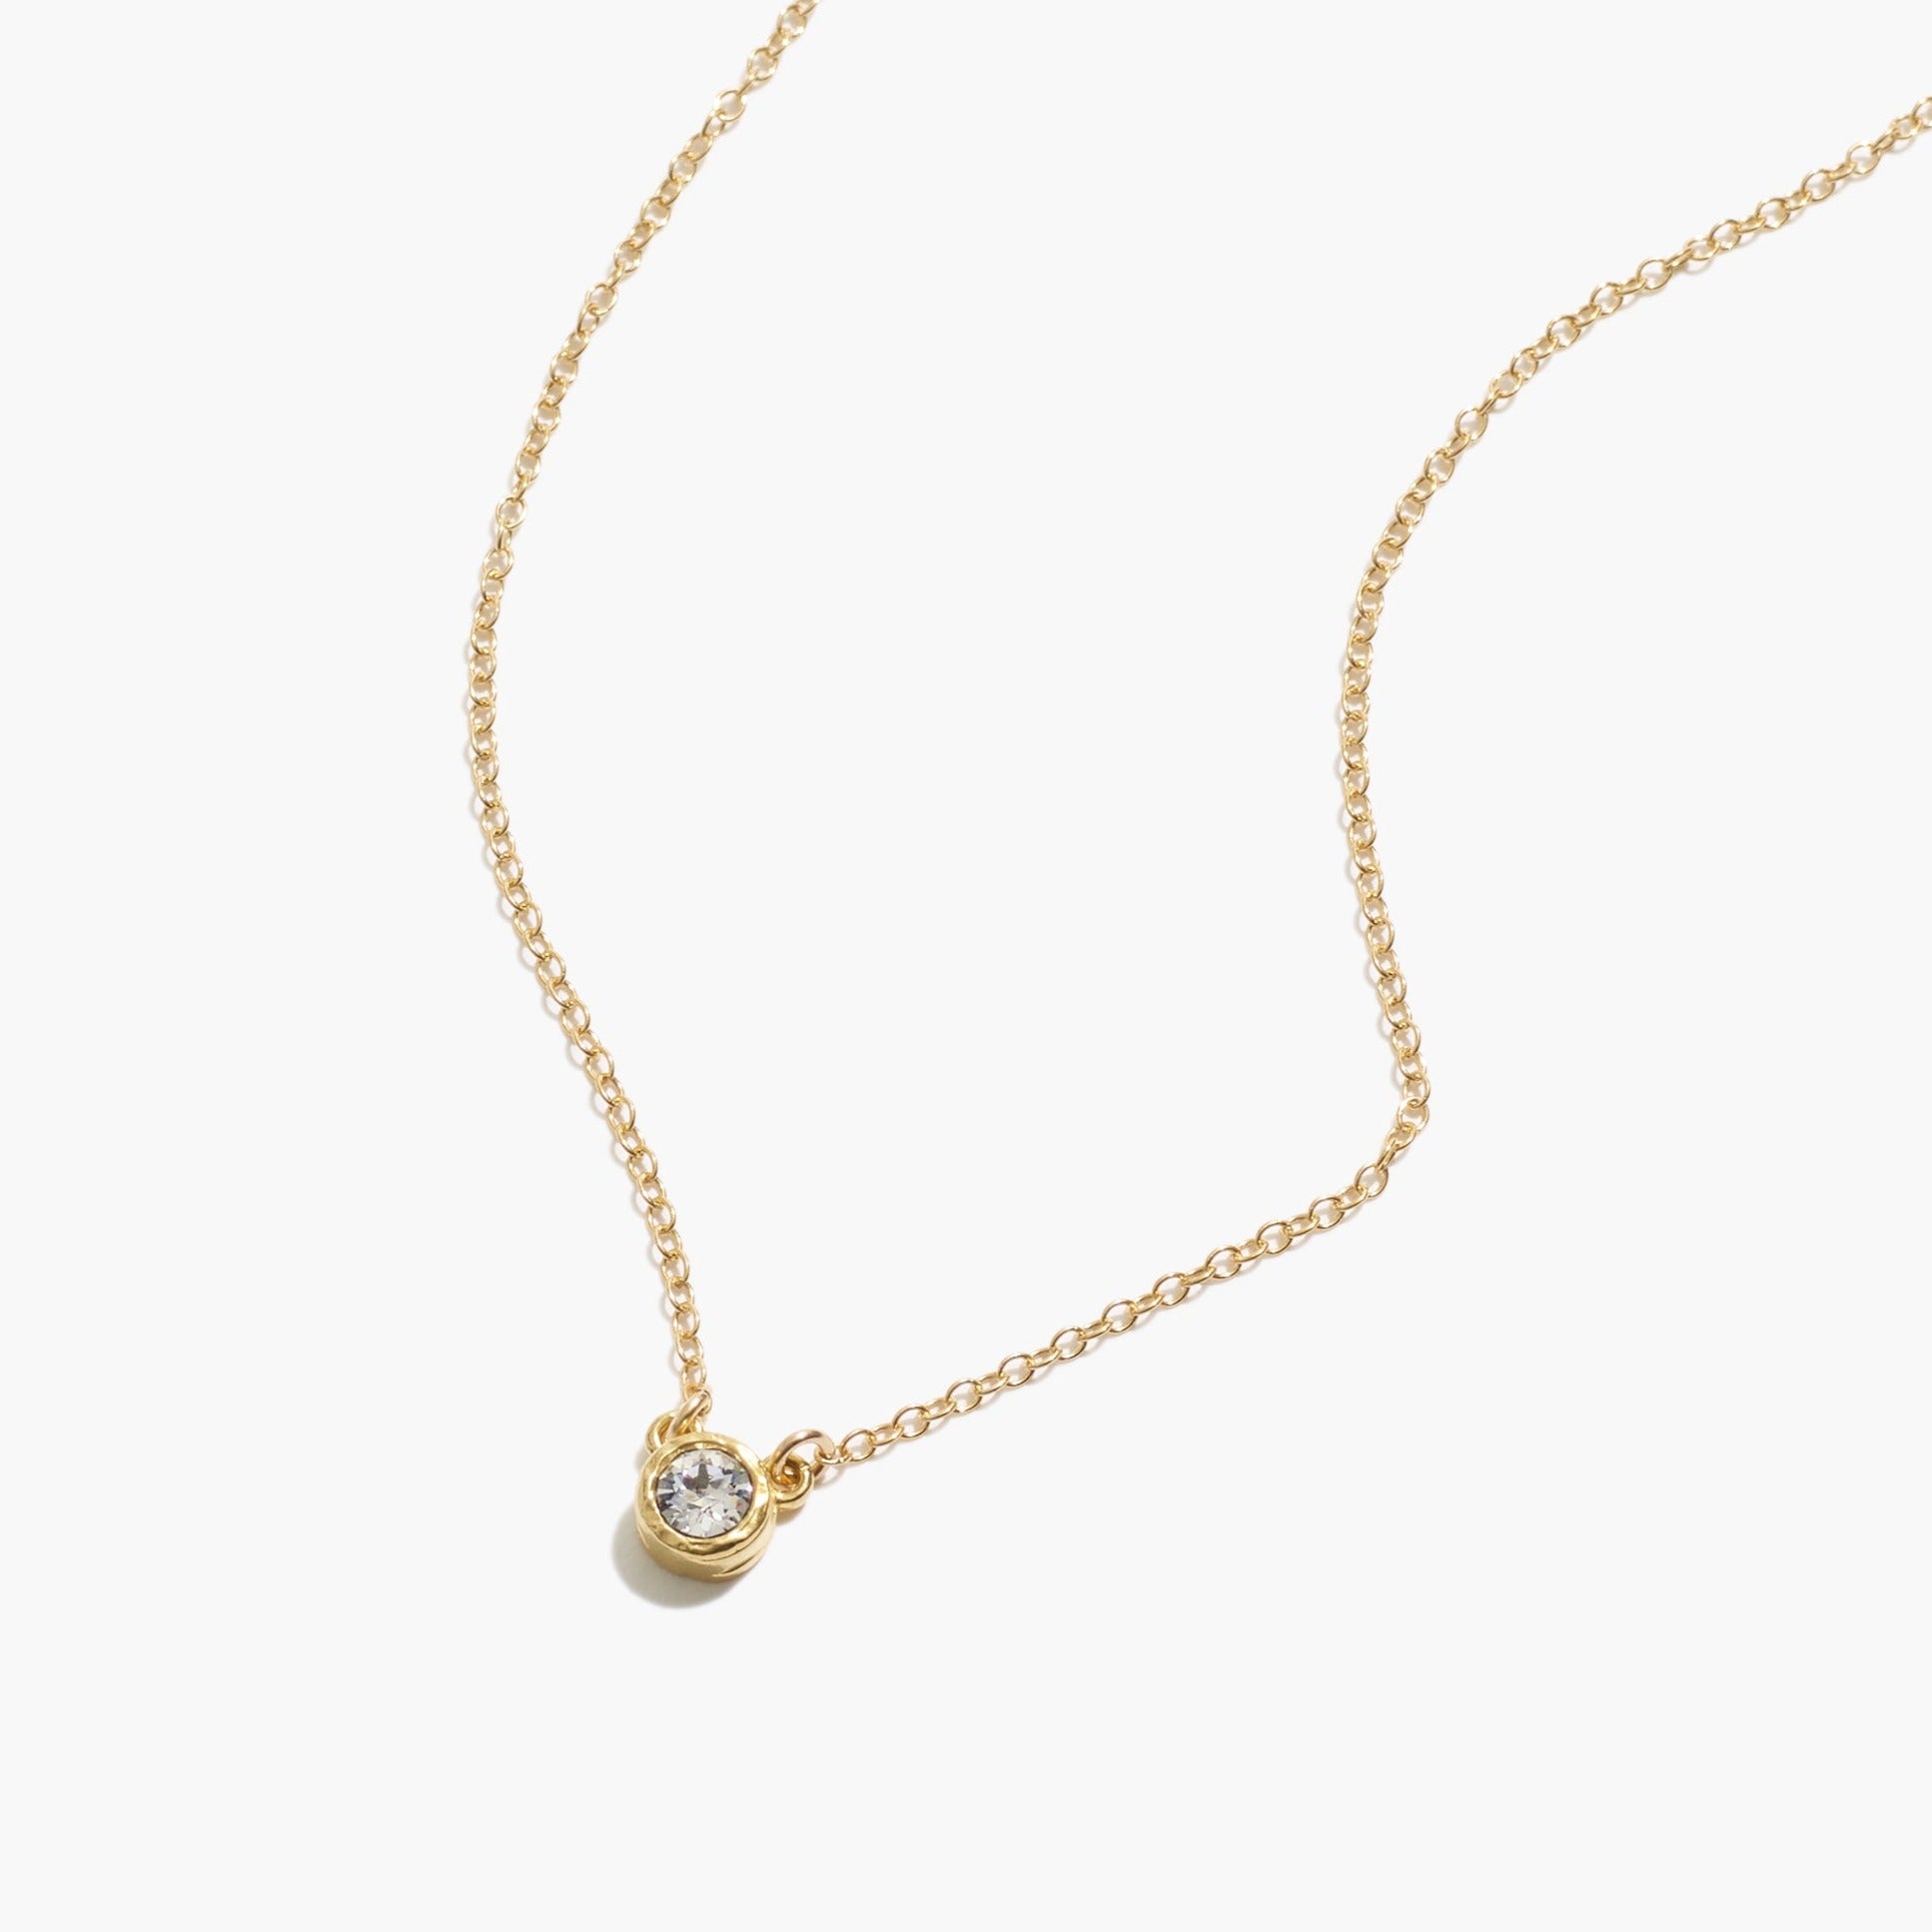 Gold Birthstone Necklace by Katie Dean Jewelry, made in America, perfect for the dainty minimal jewelry lovers, April